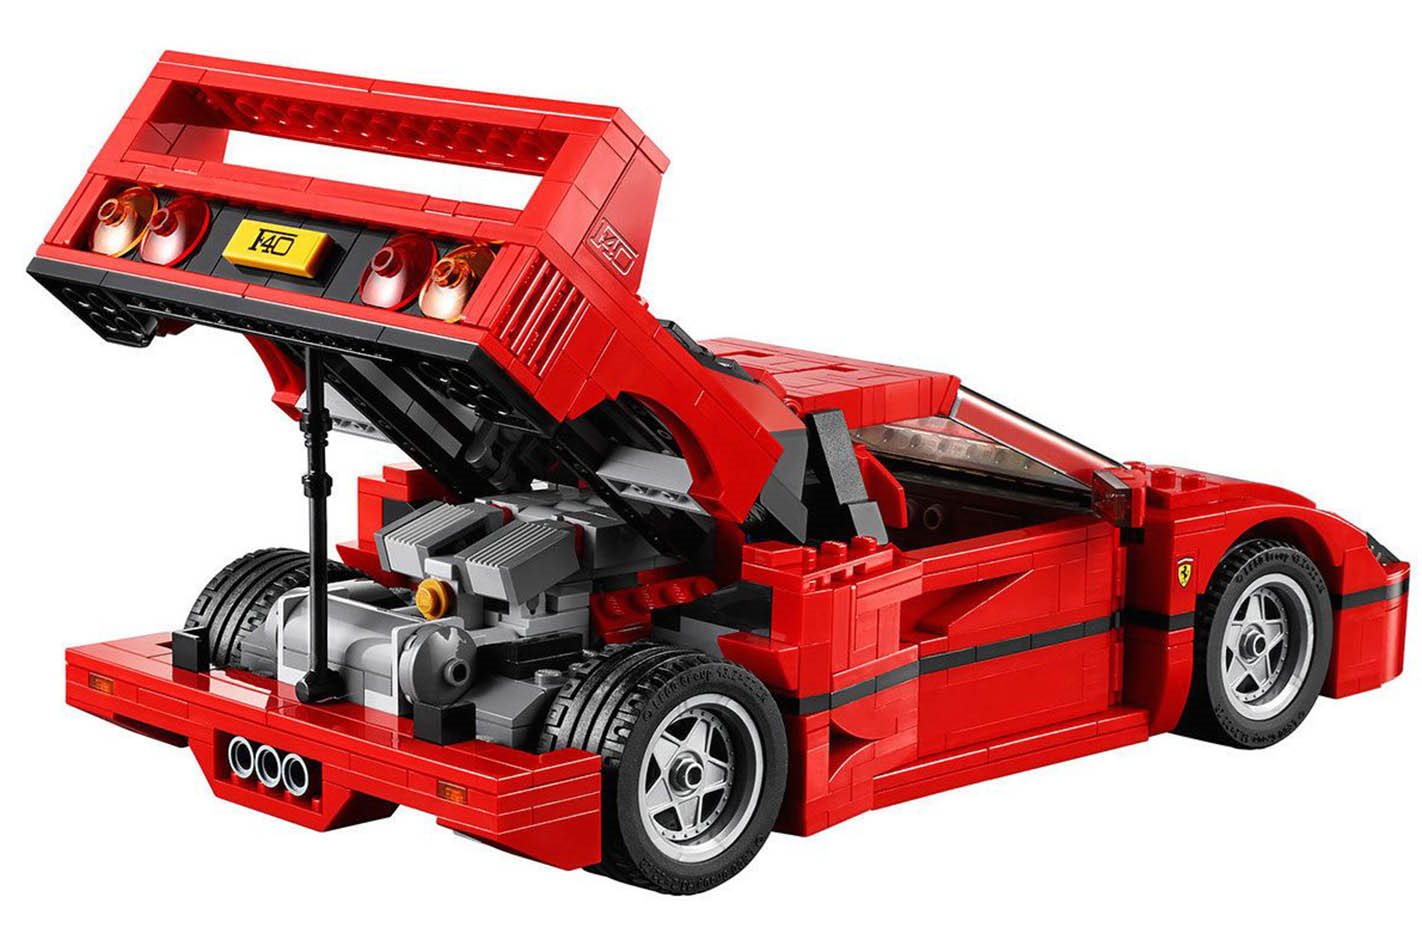 The 10 best Lego car sets